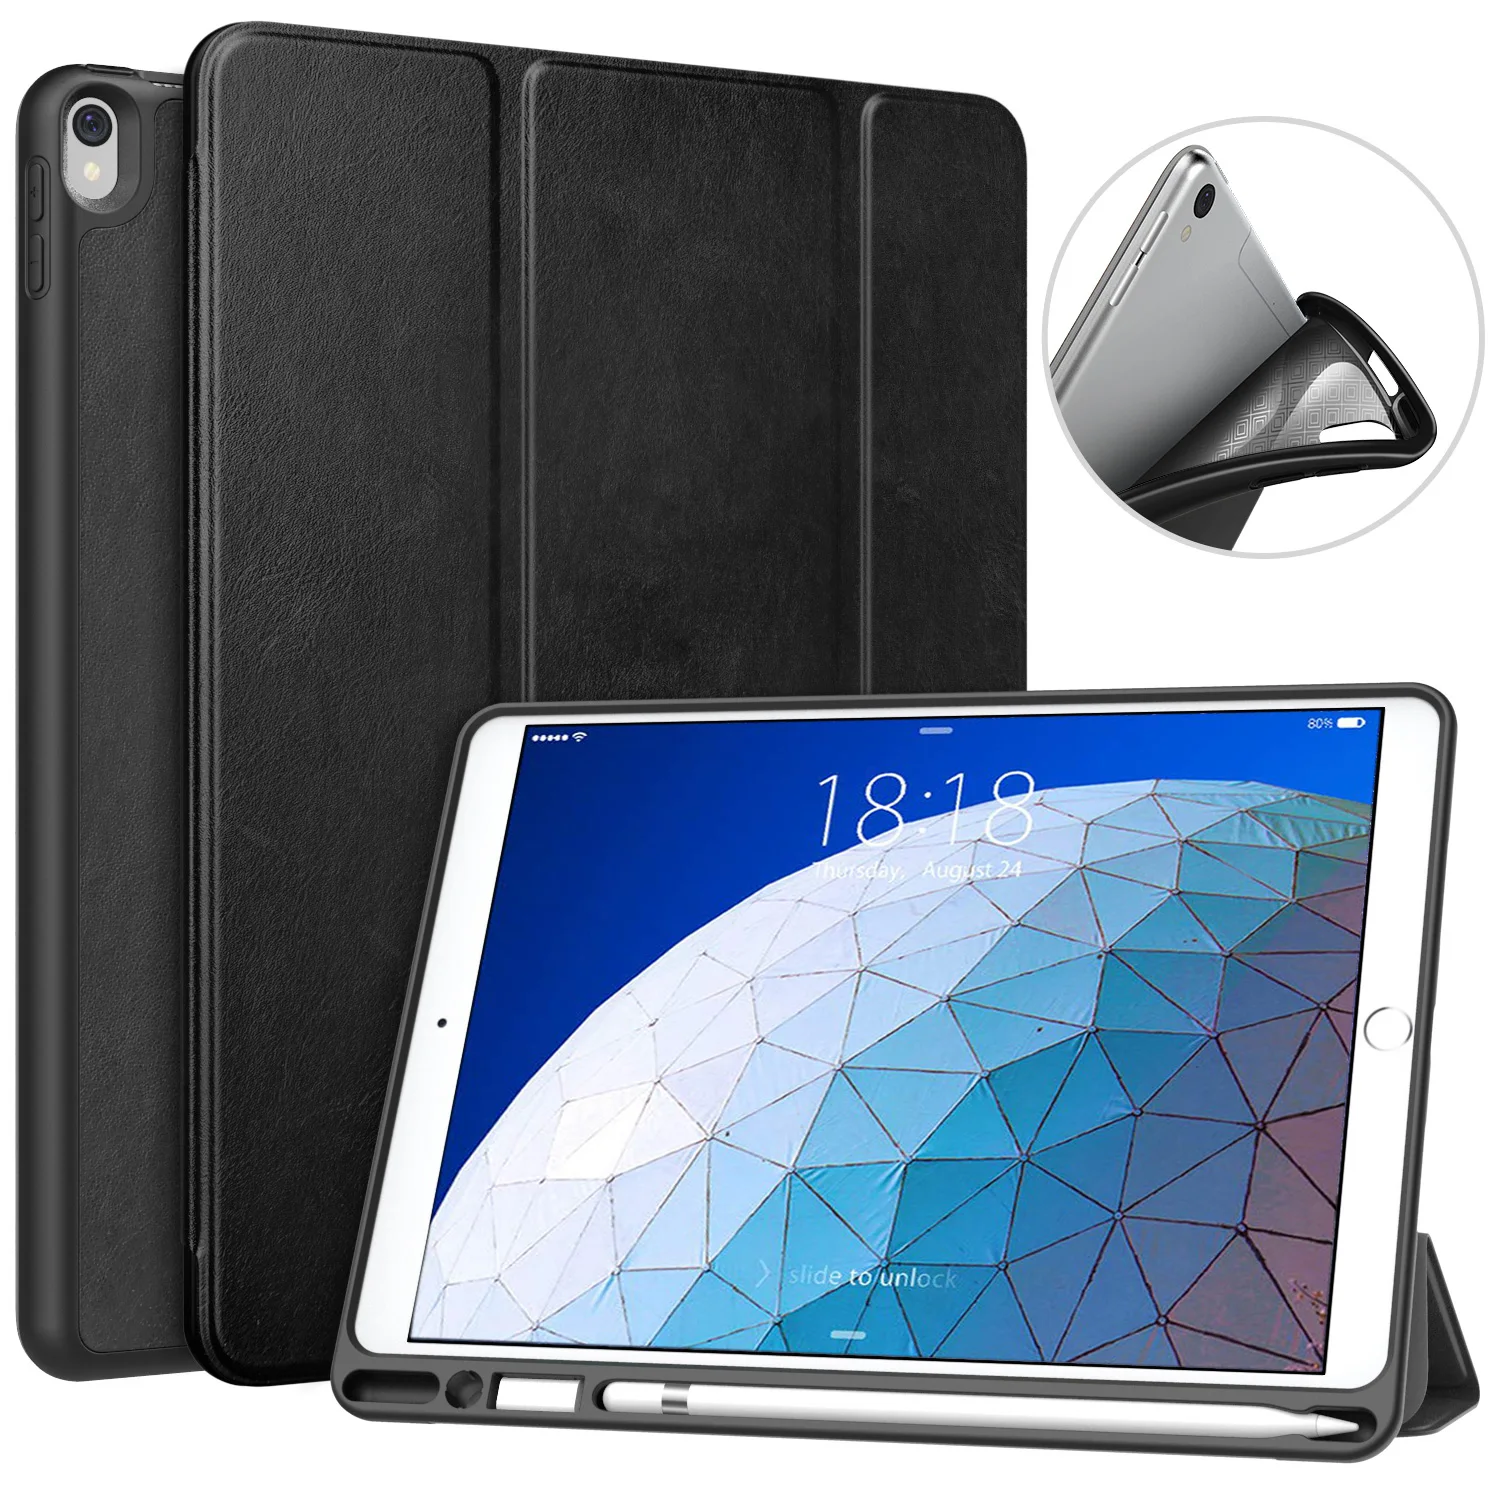 MoKo Case For New iPad Air (3rd Generation) 10.5